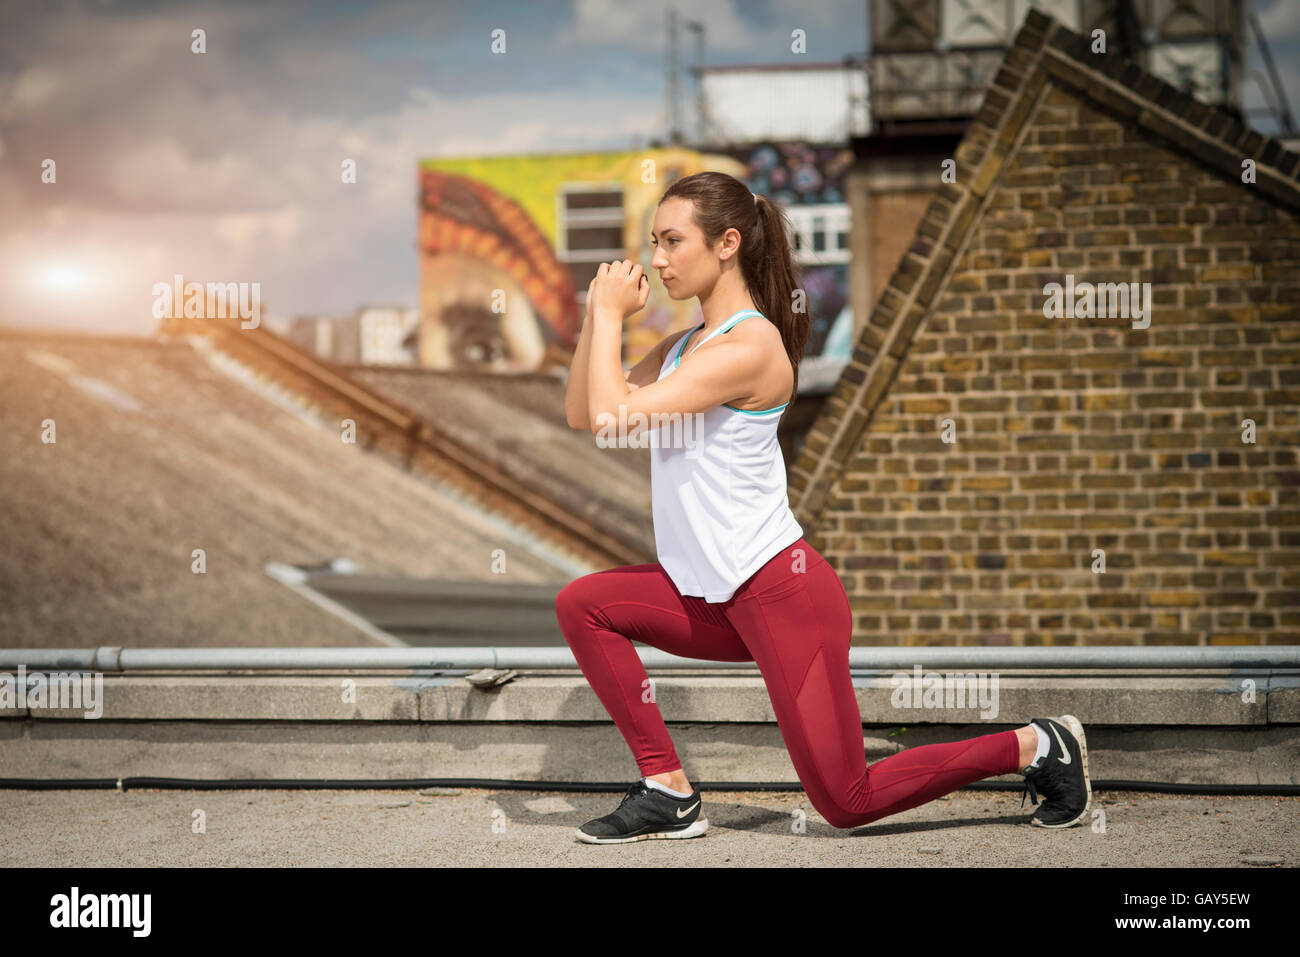 Sporty woman wearing fitness wear stretching Stock Photo